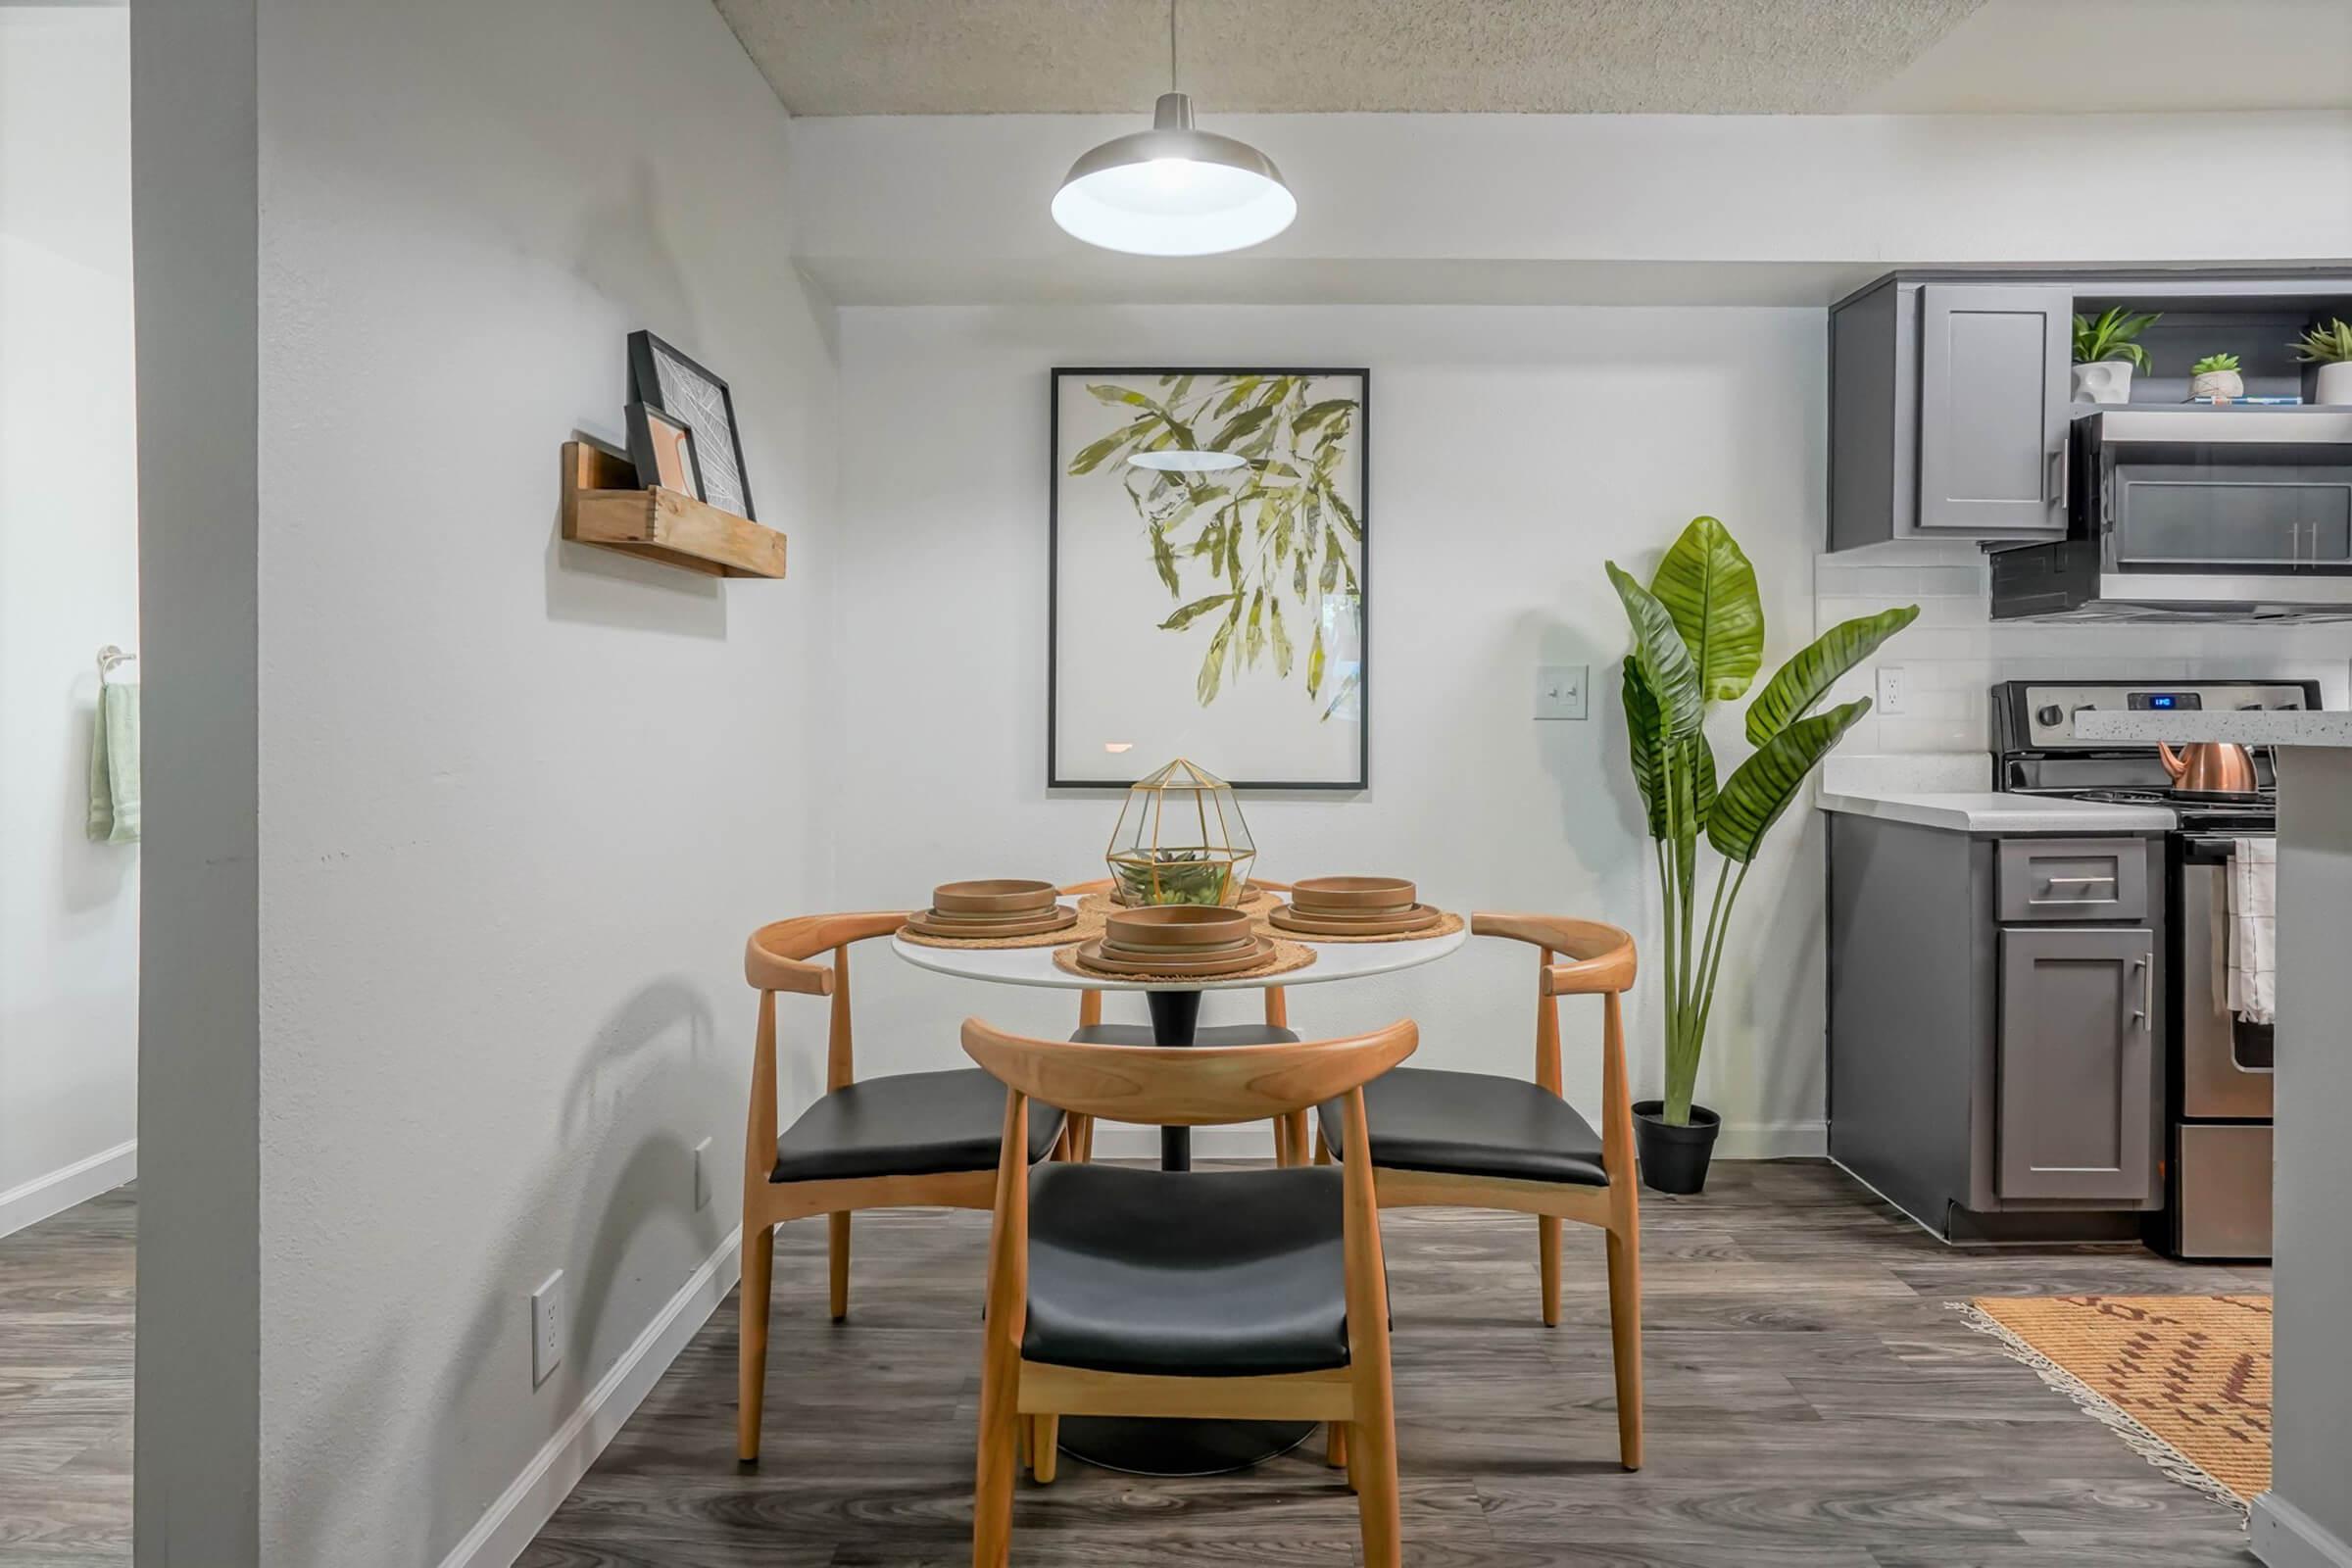 Updated Dining Area with Modern Finishings - Treehouse Apartments - Albuquerque - New Mexico